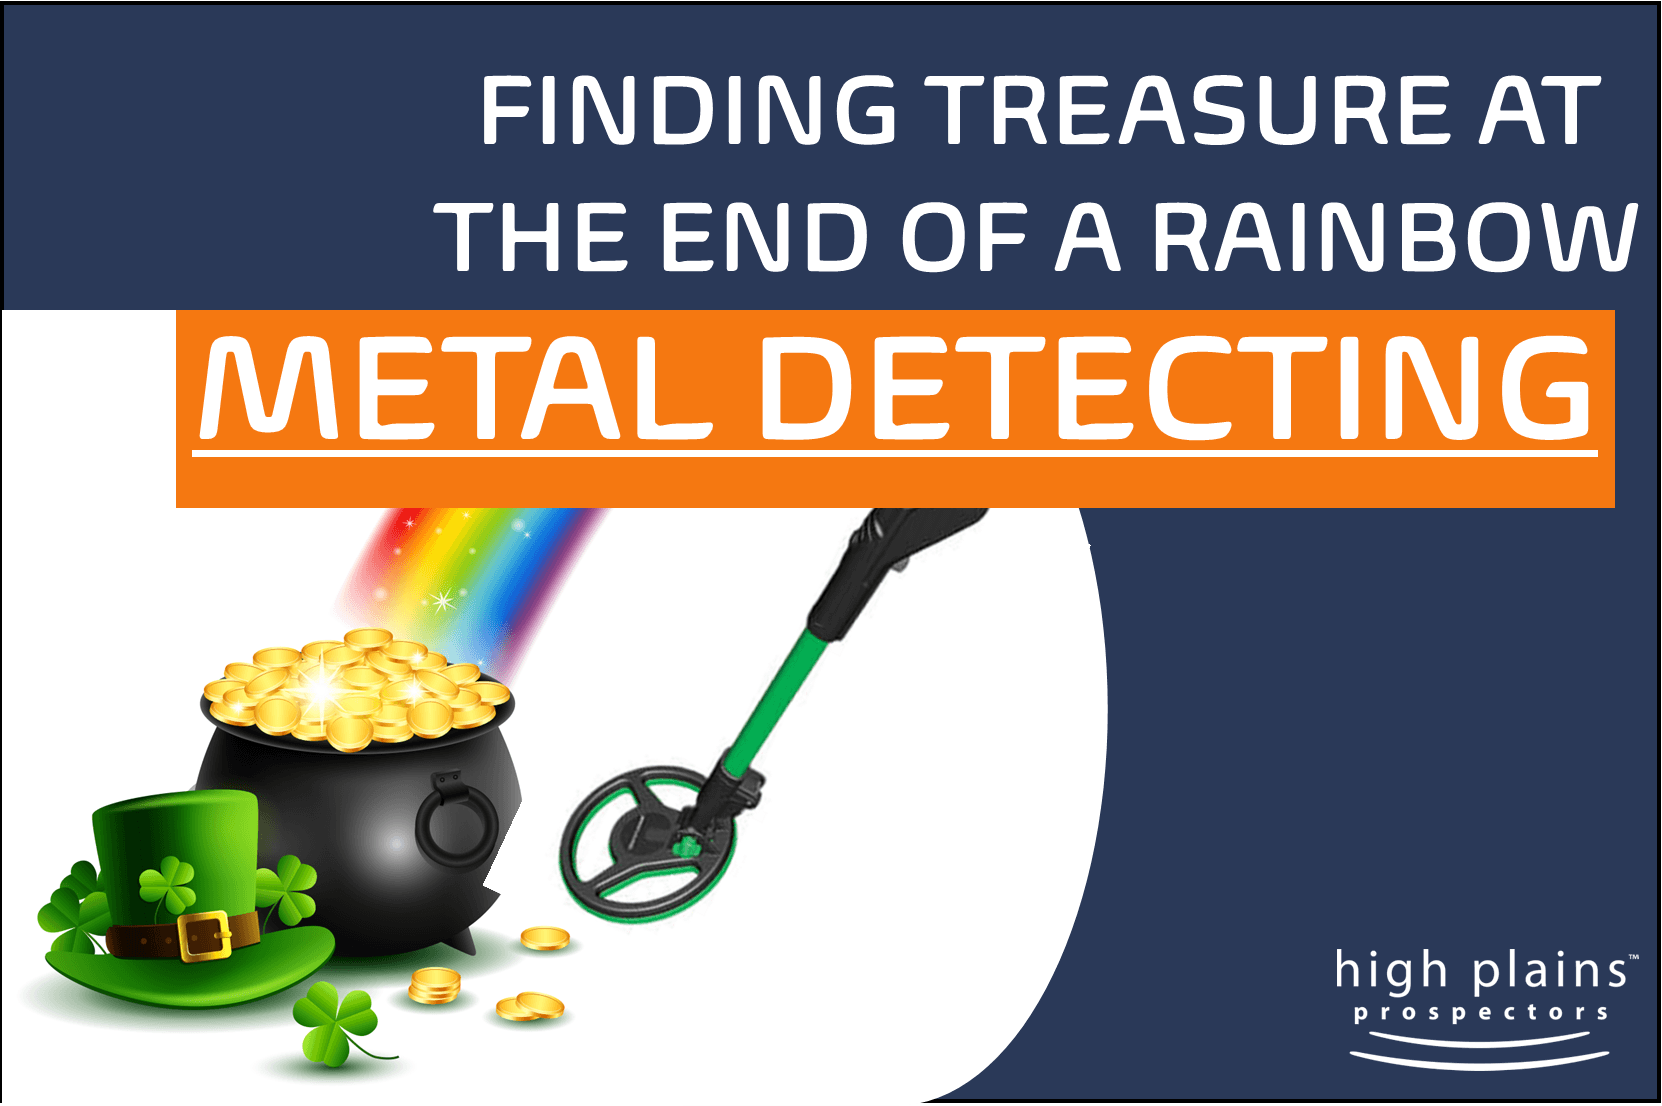 Video: Finding Treasure at the end of a Rainbow Metal Detecting